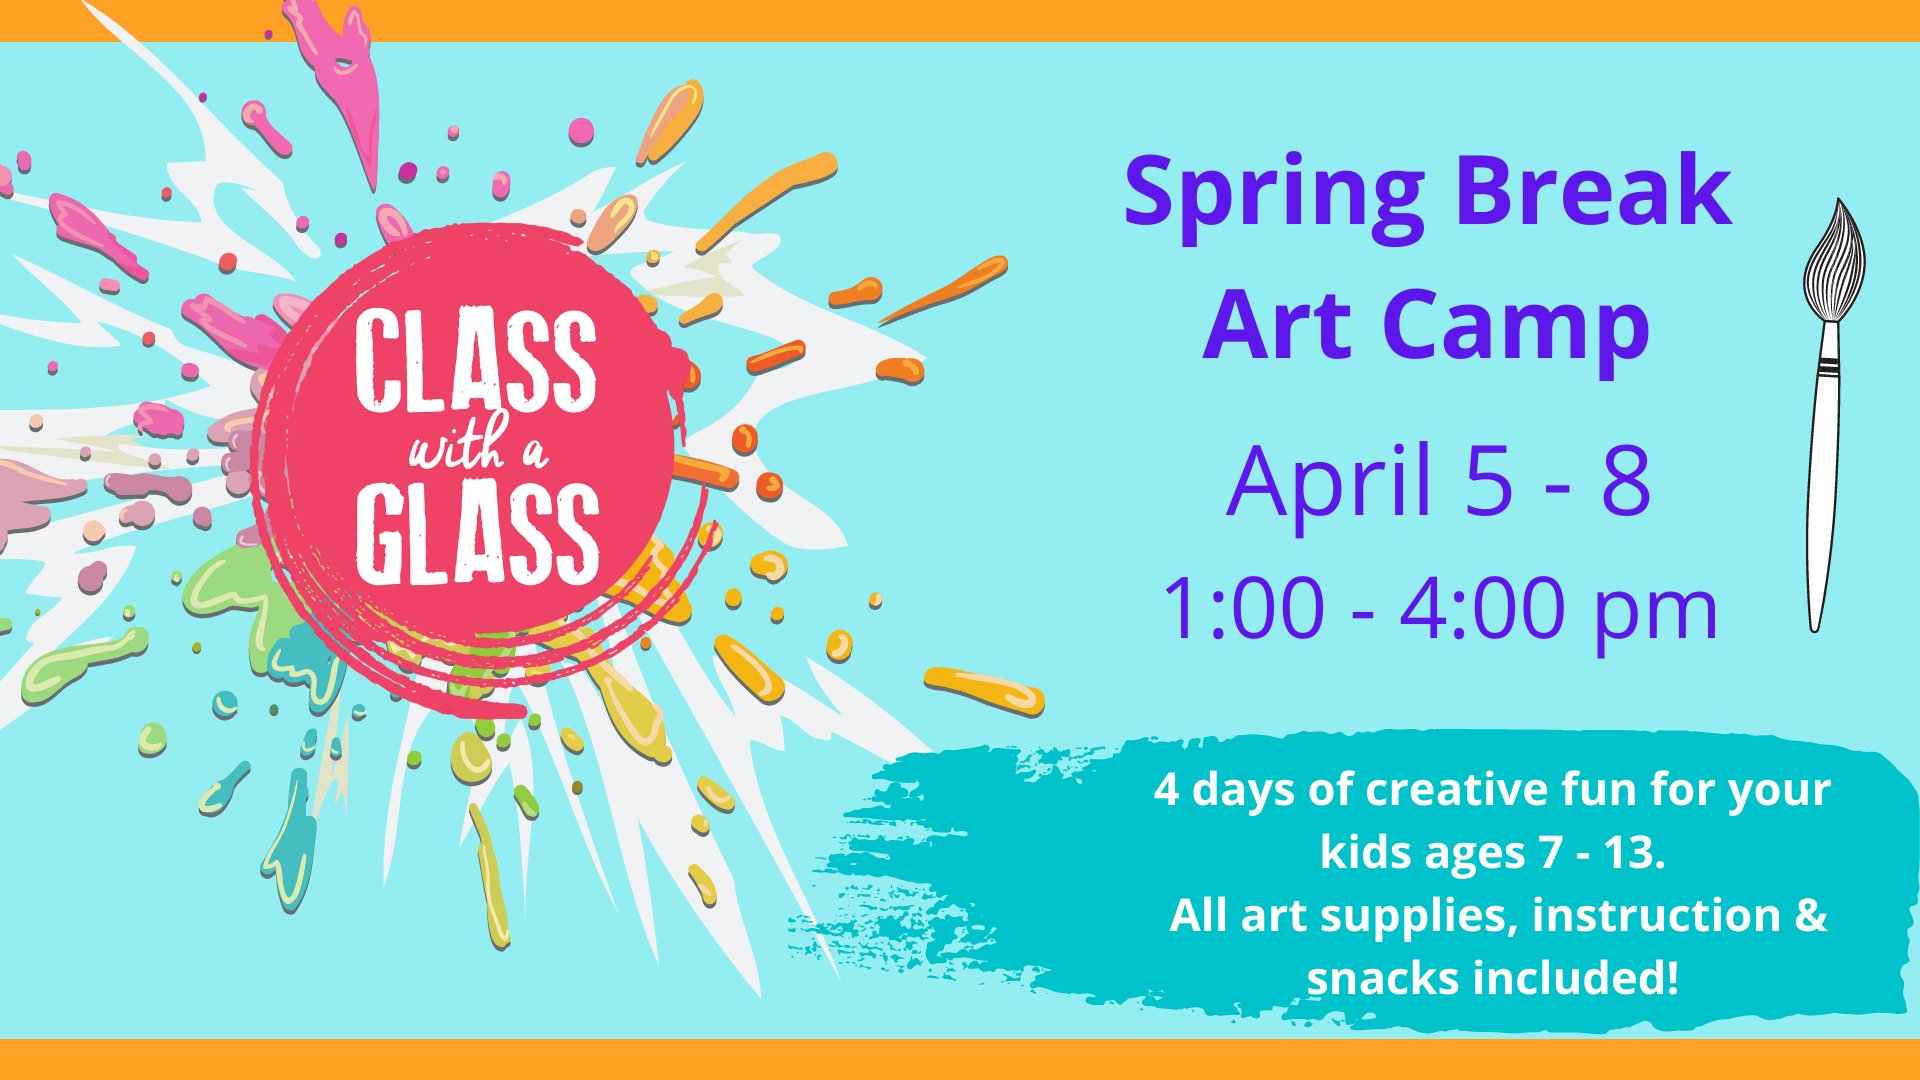 <h1 class="tribe-events-single-event-title">Spring Break Art Camp</h1>